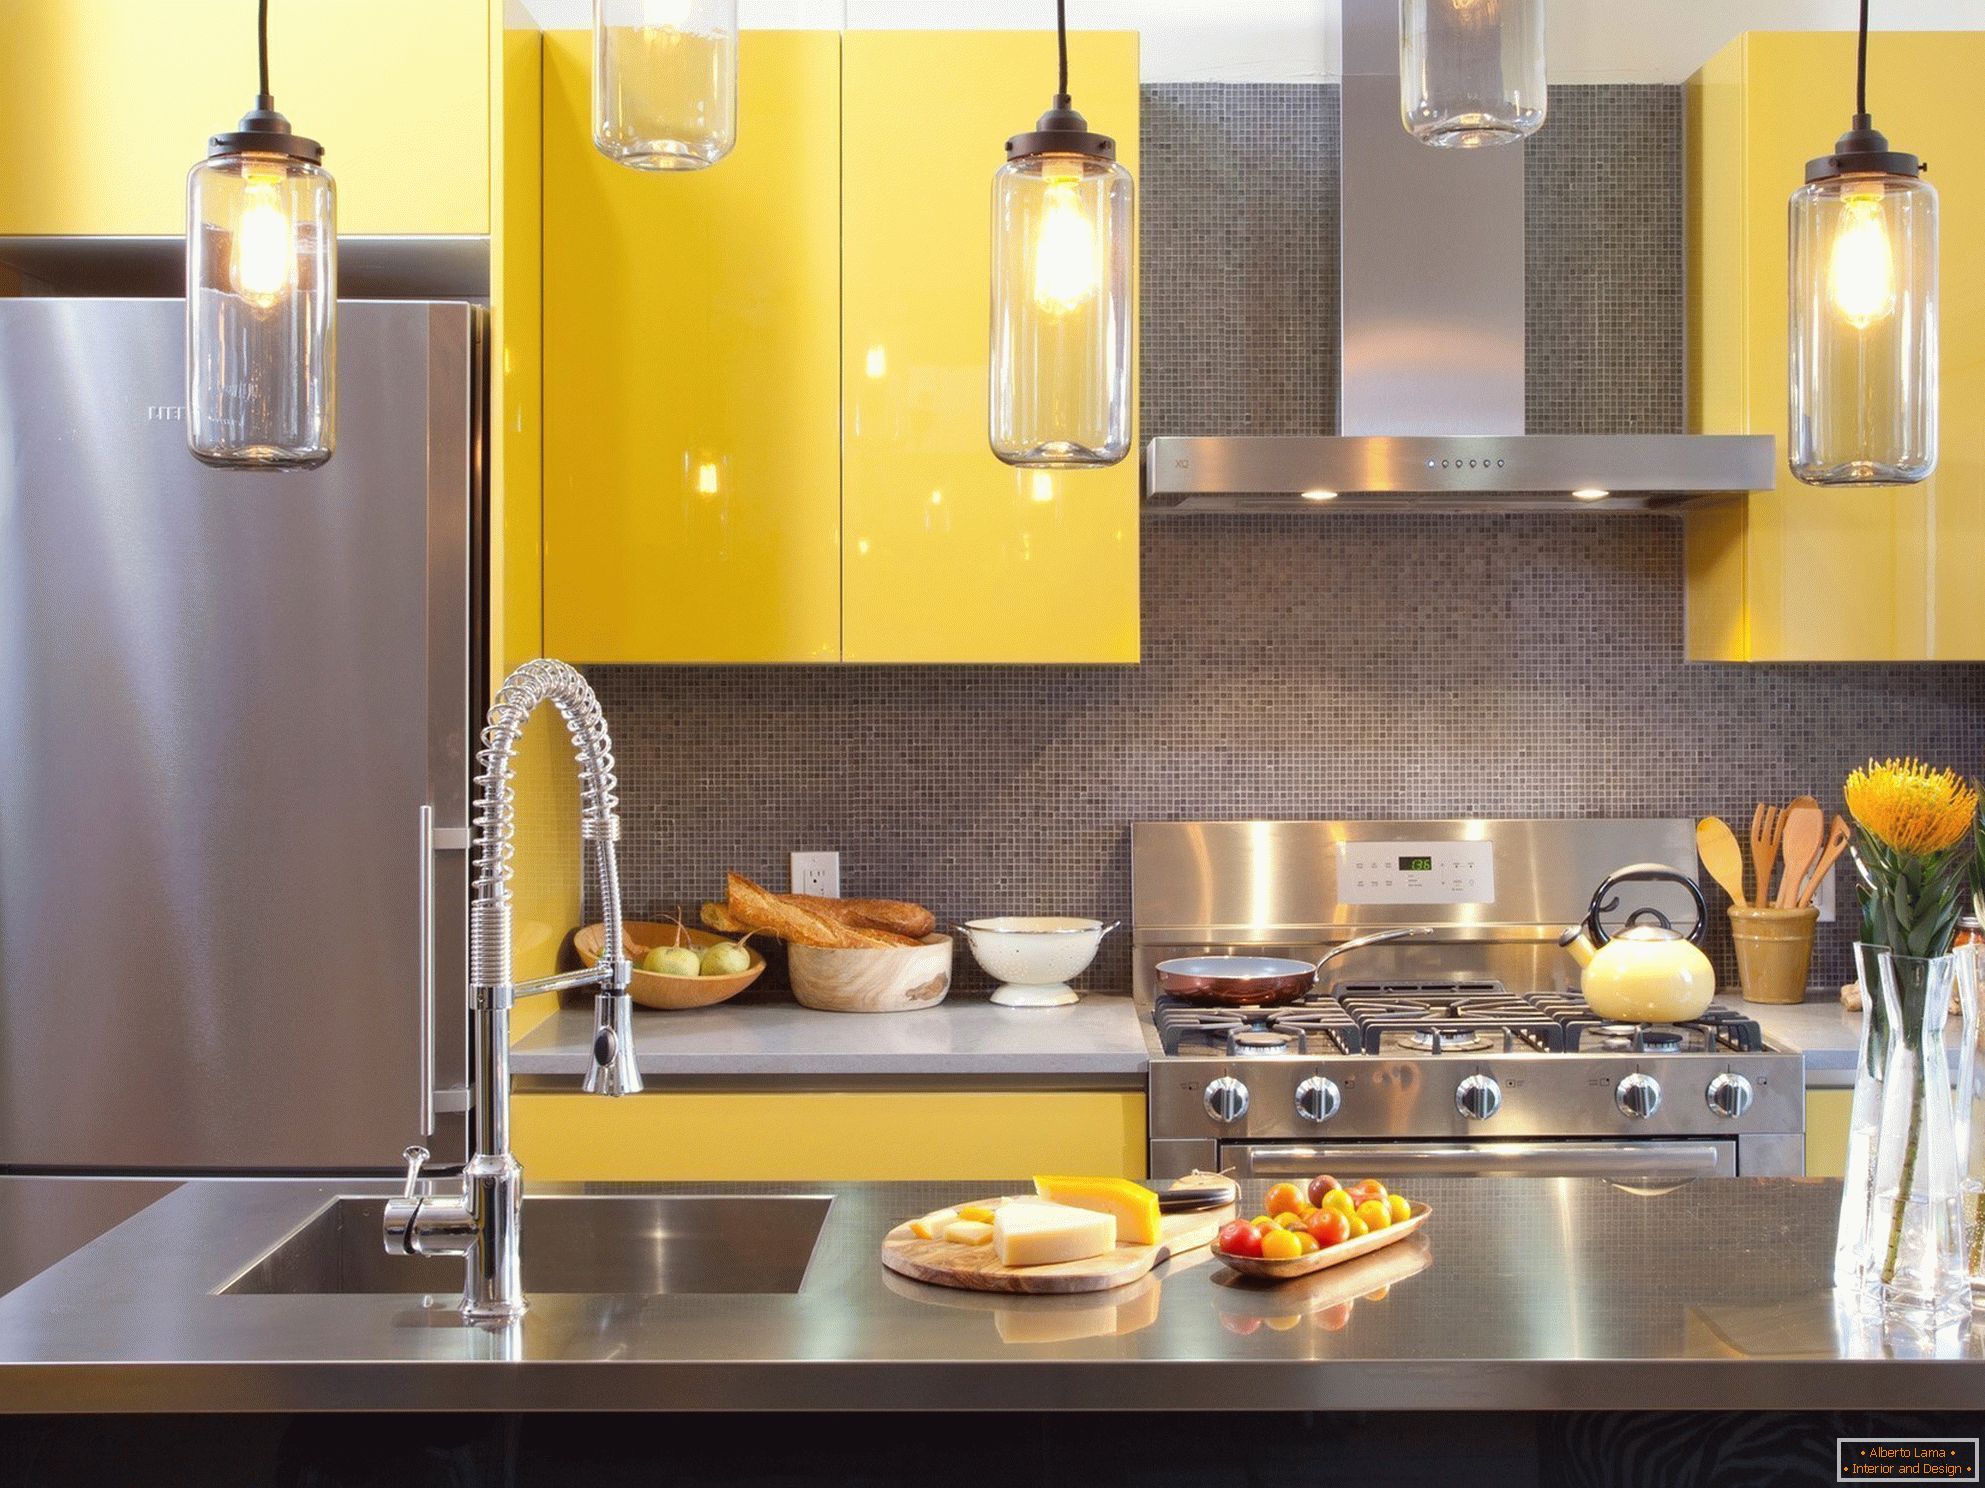 Kitchen with yellow furniture